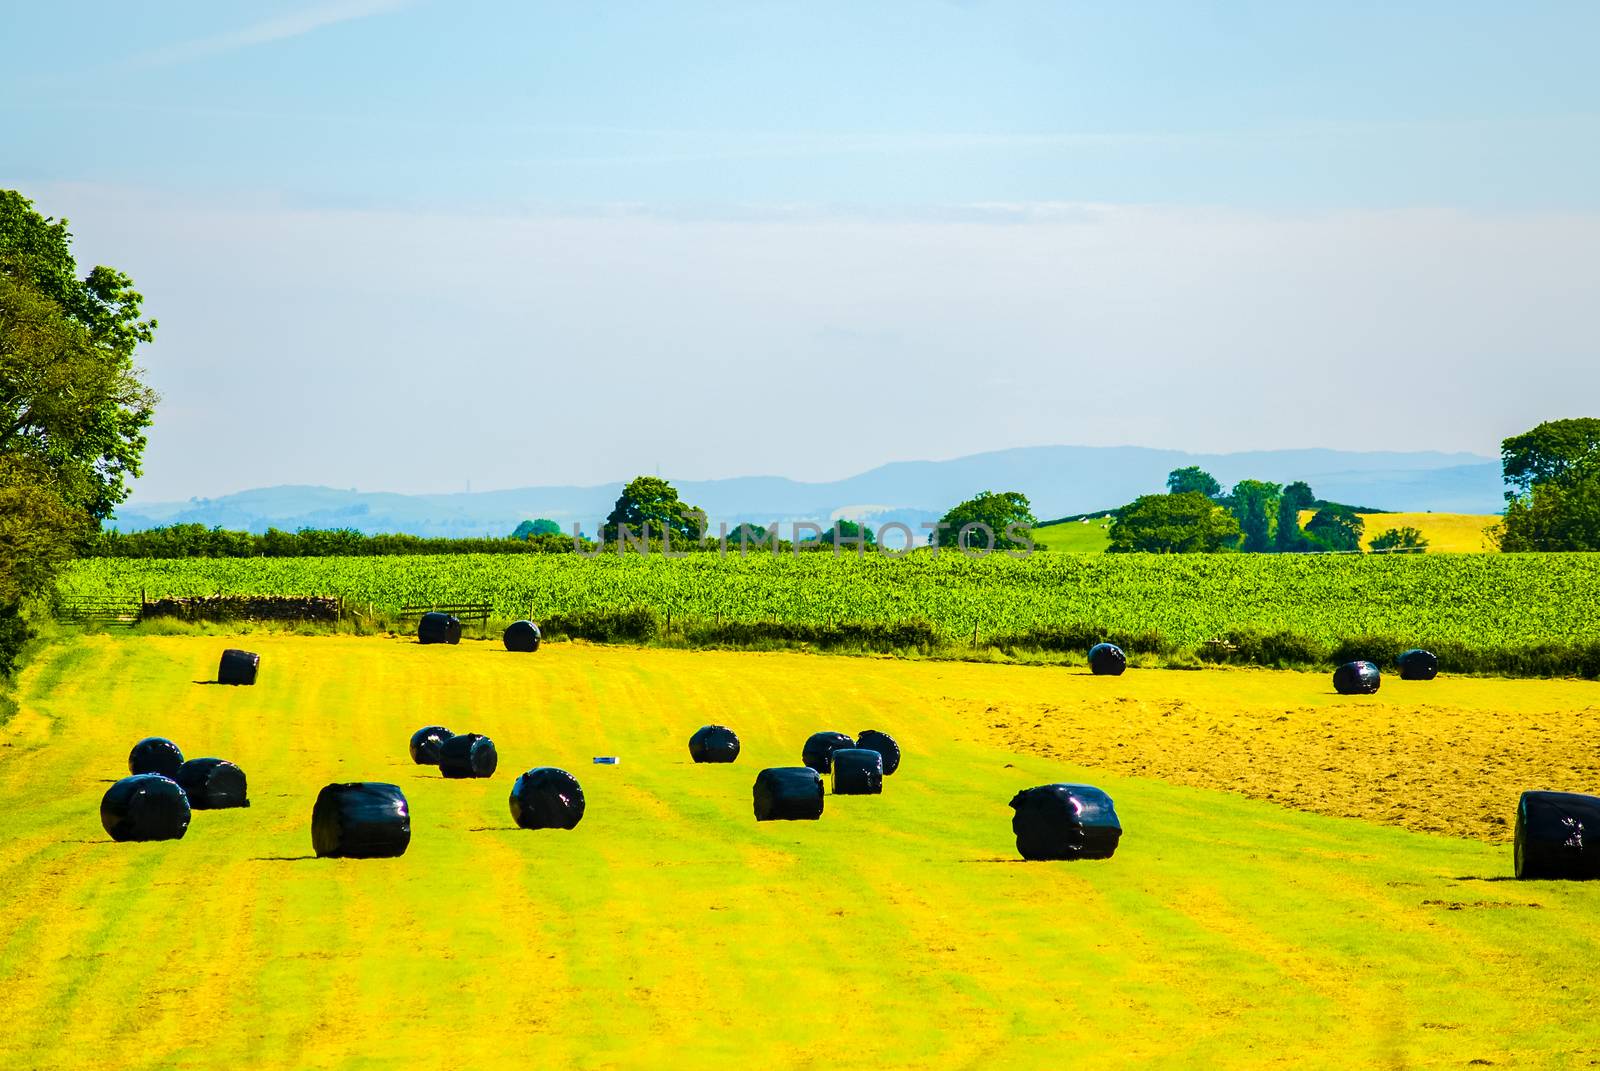 Bales of silage on a field in summertime just after grass cutting UK